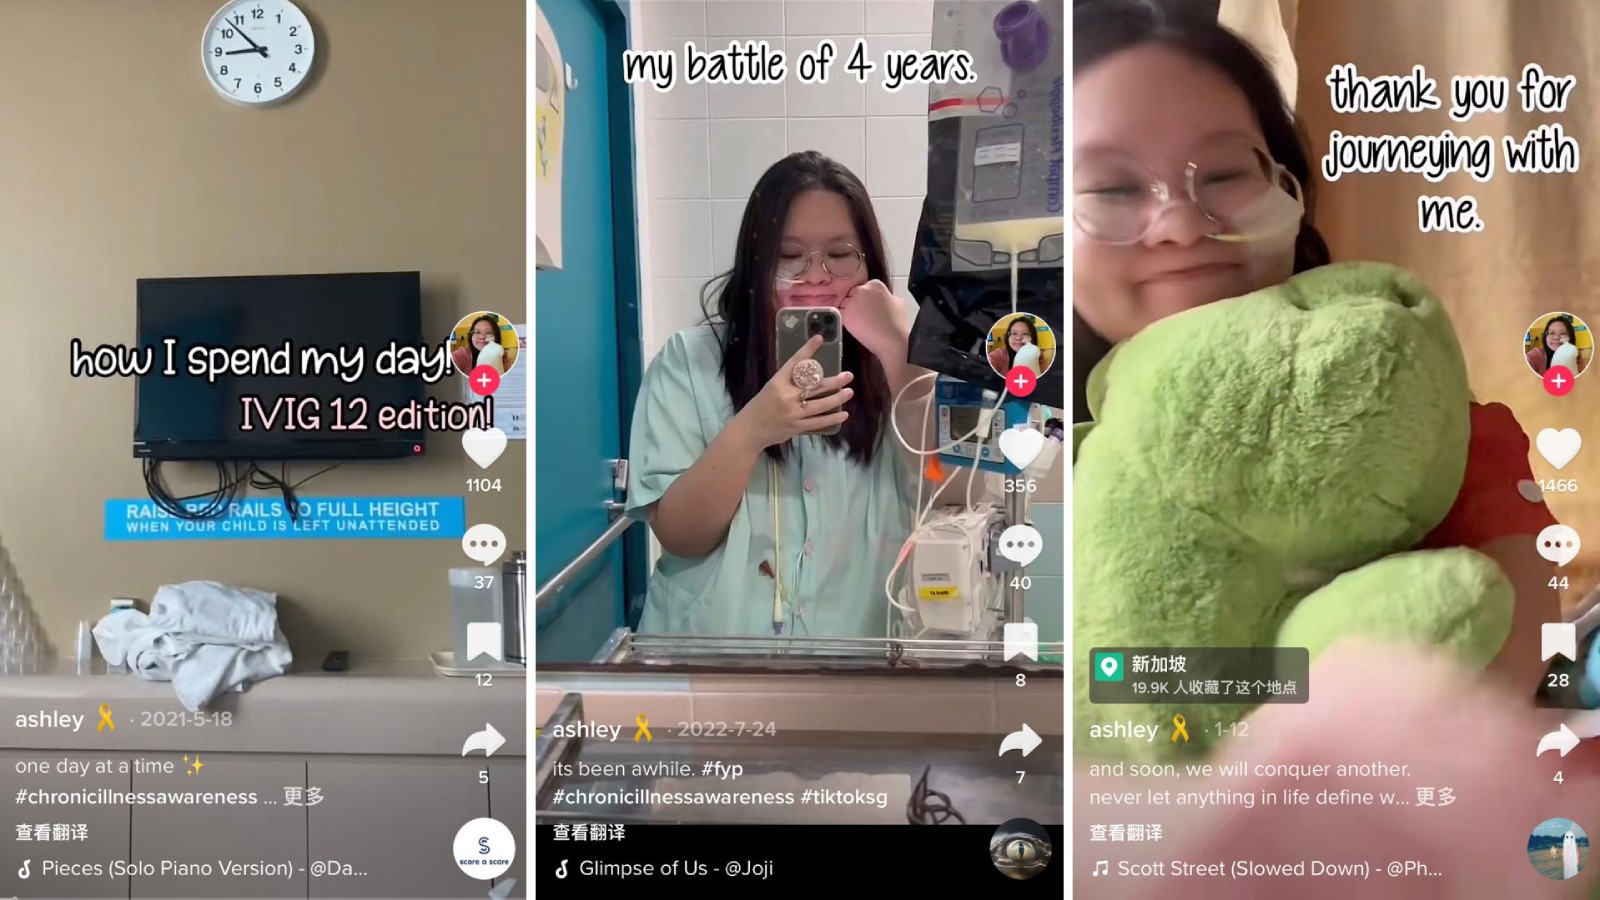 Post thumbnail of “I’m almost always in pain”: RDSS teen beneficiary shares 4-year rare disorder battle on TikTok